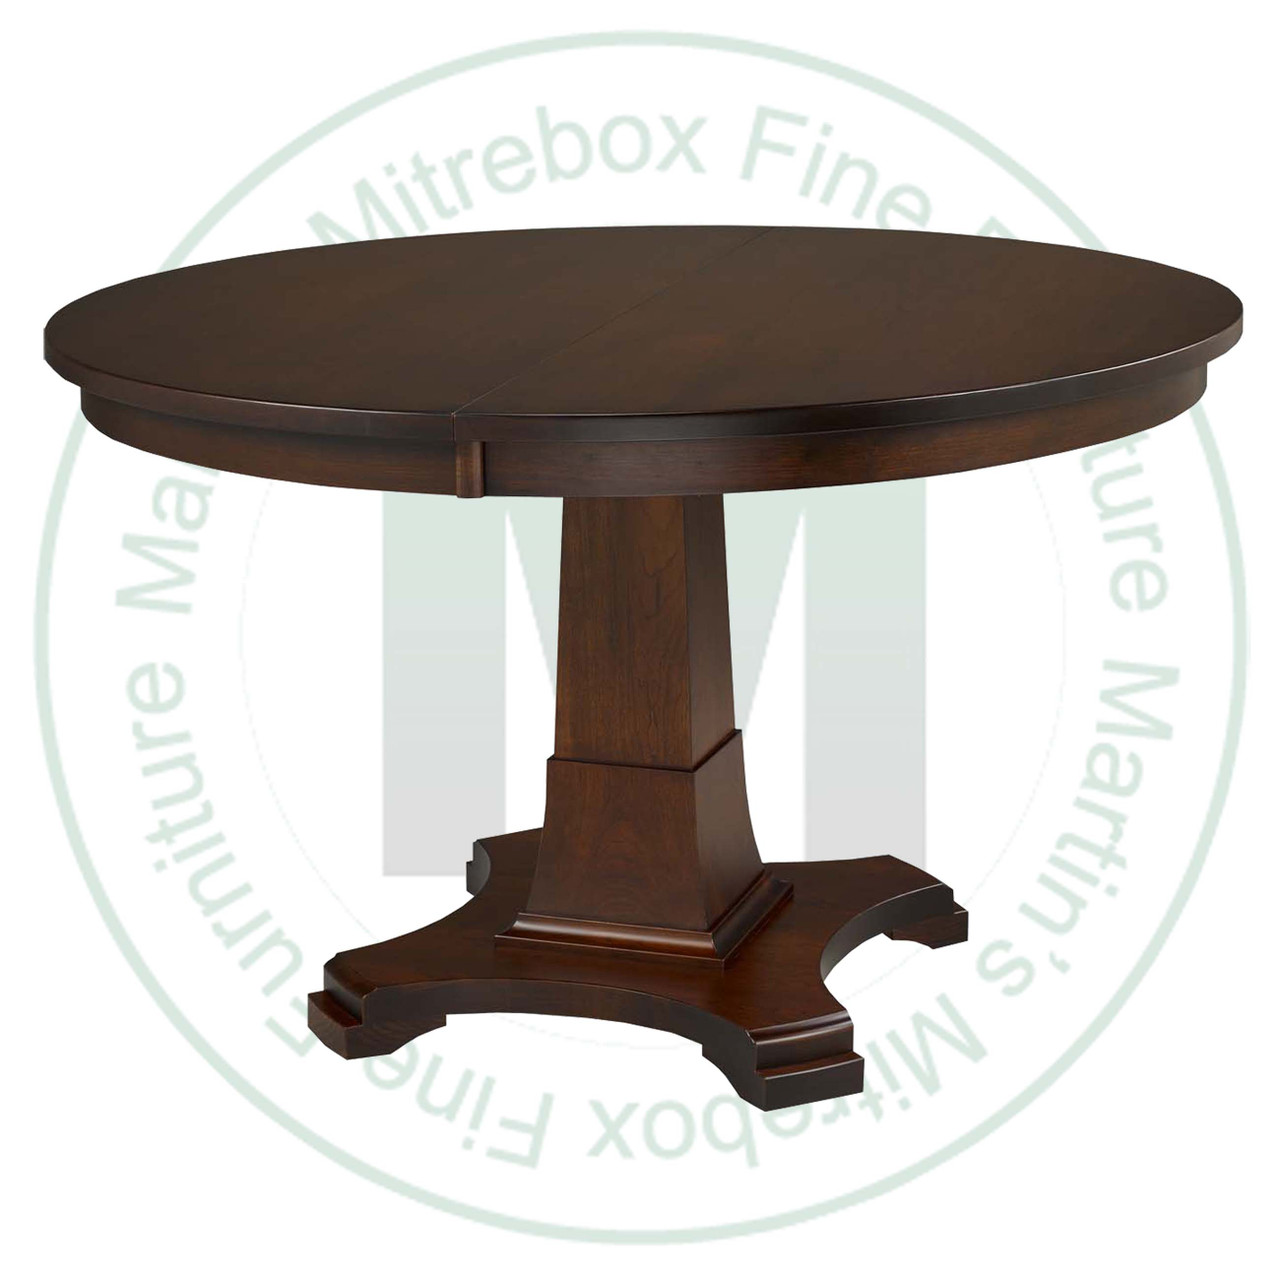 Oak Abbey Single Pedestal Table 42''D x 42''W x 30''H Round Solid Table. Table Has 1'' Thick Top